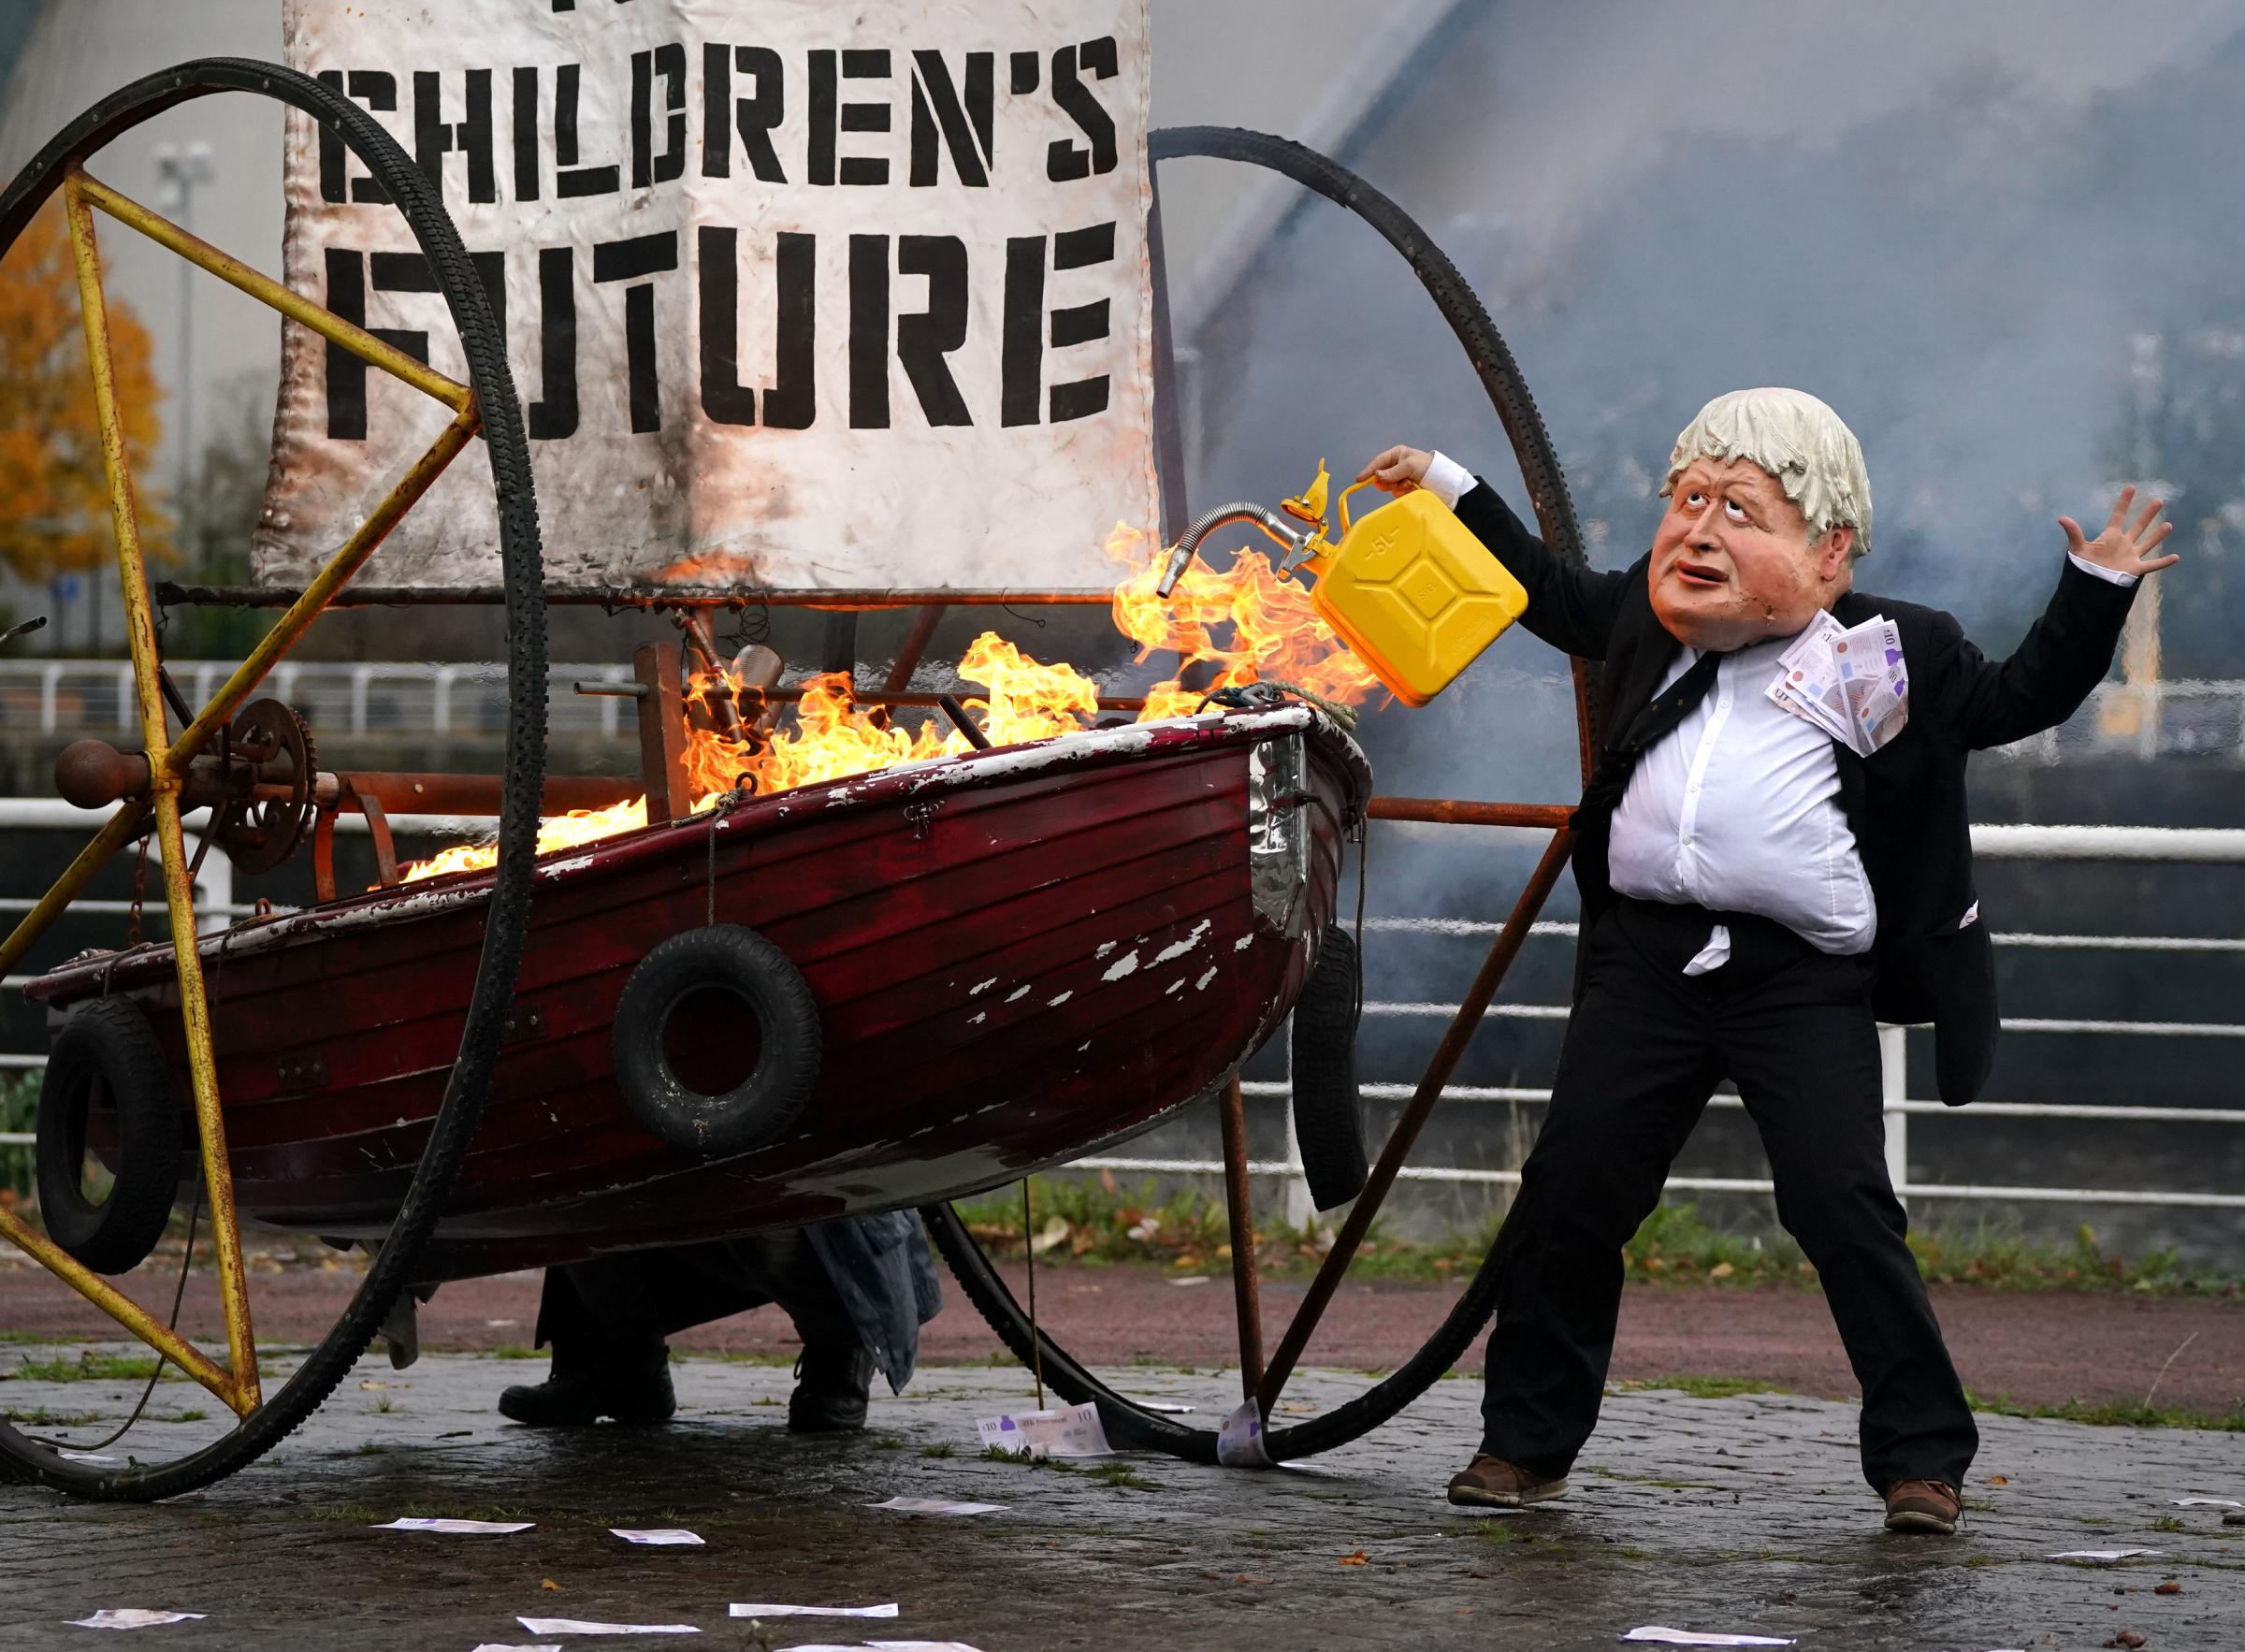 One of the many protests ahead of COP26. Performers from Ocean Rebellion dressed as Prime Minister Boris Johnson and an Oilhead set light to the sail of a small boat which reads Your Childrens Future as they burn stacks of money on the banks of the